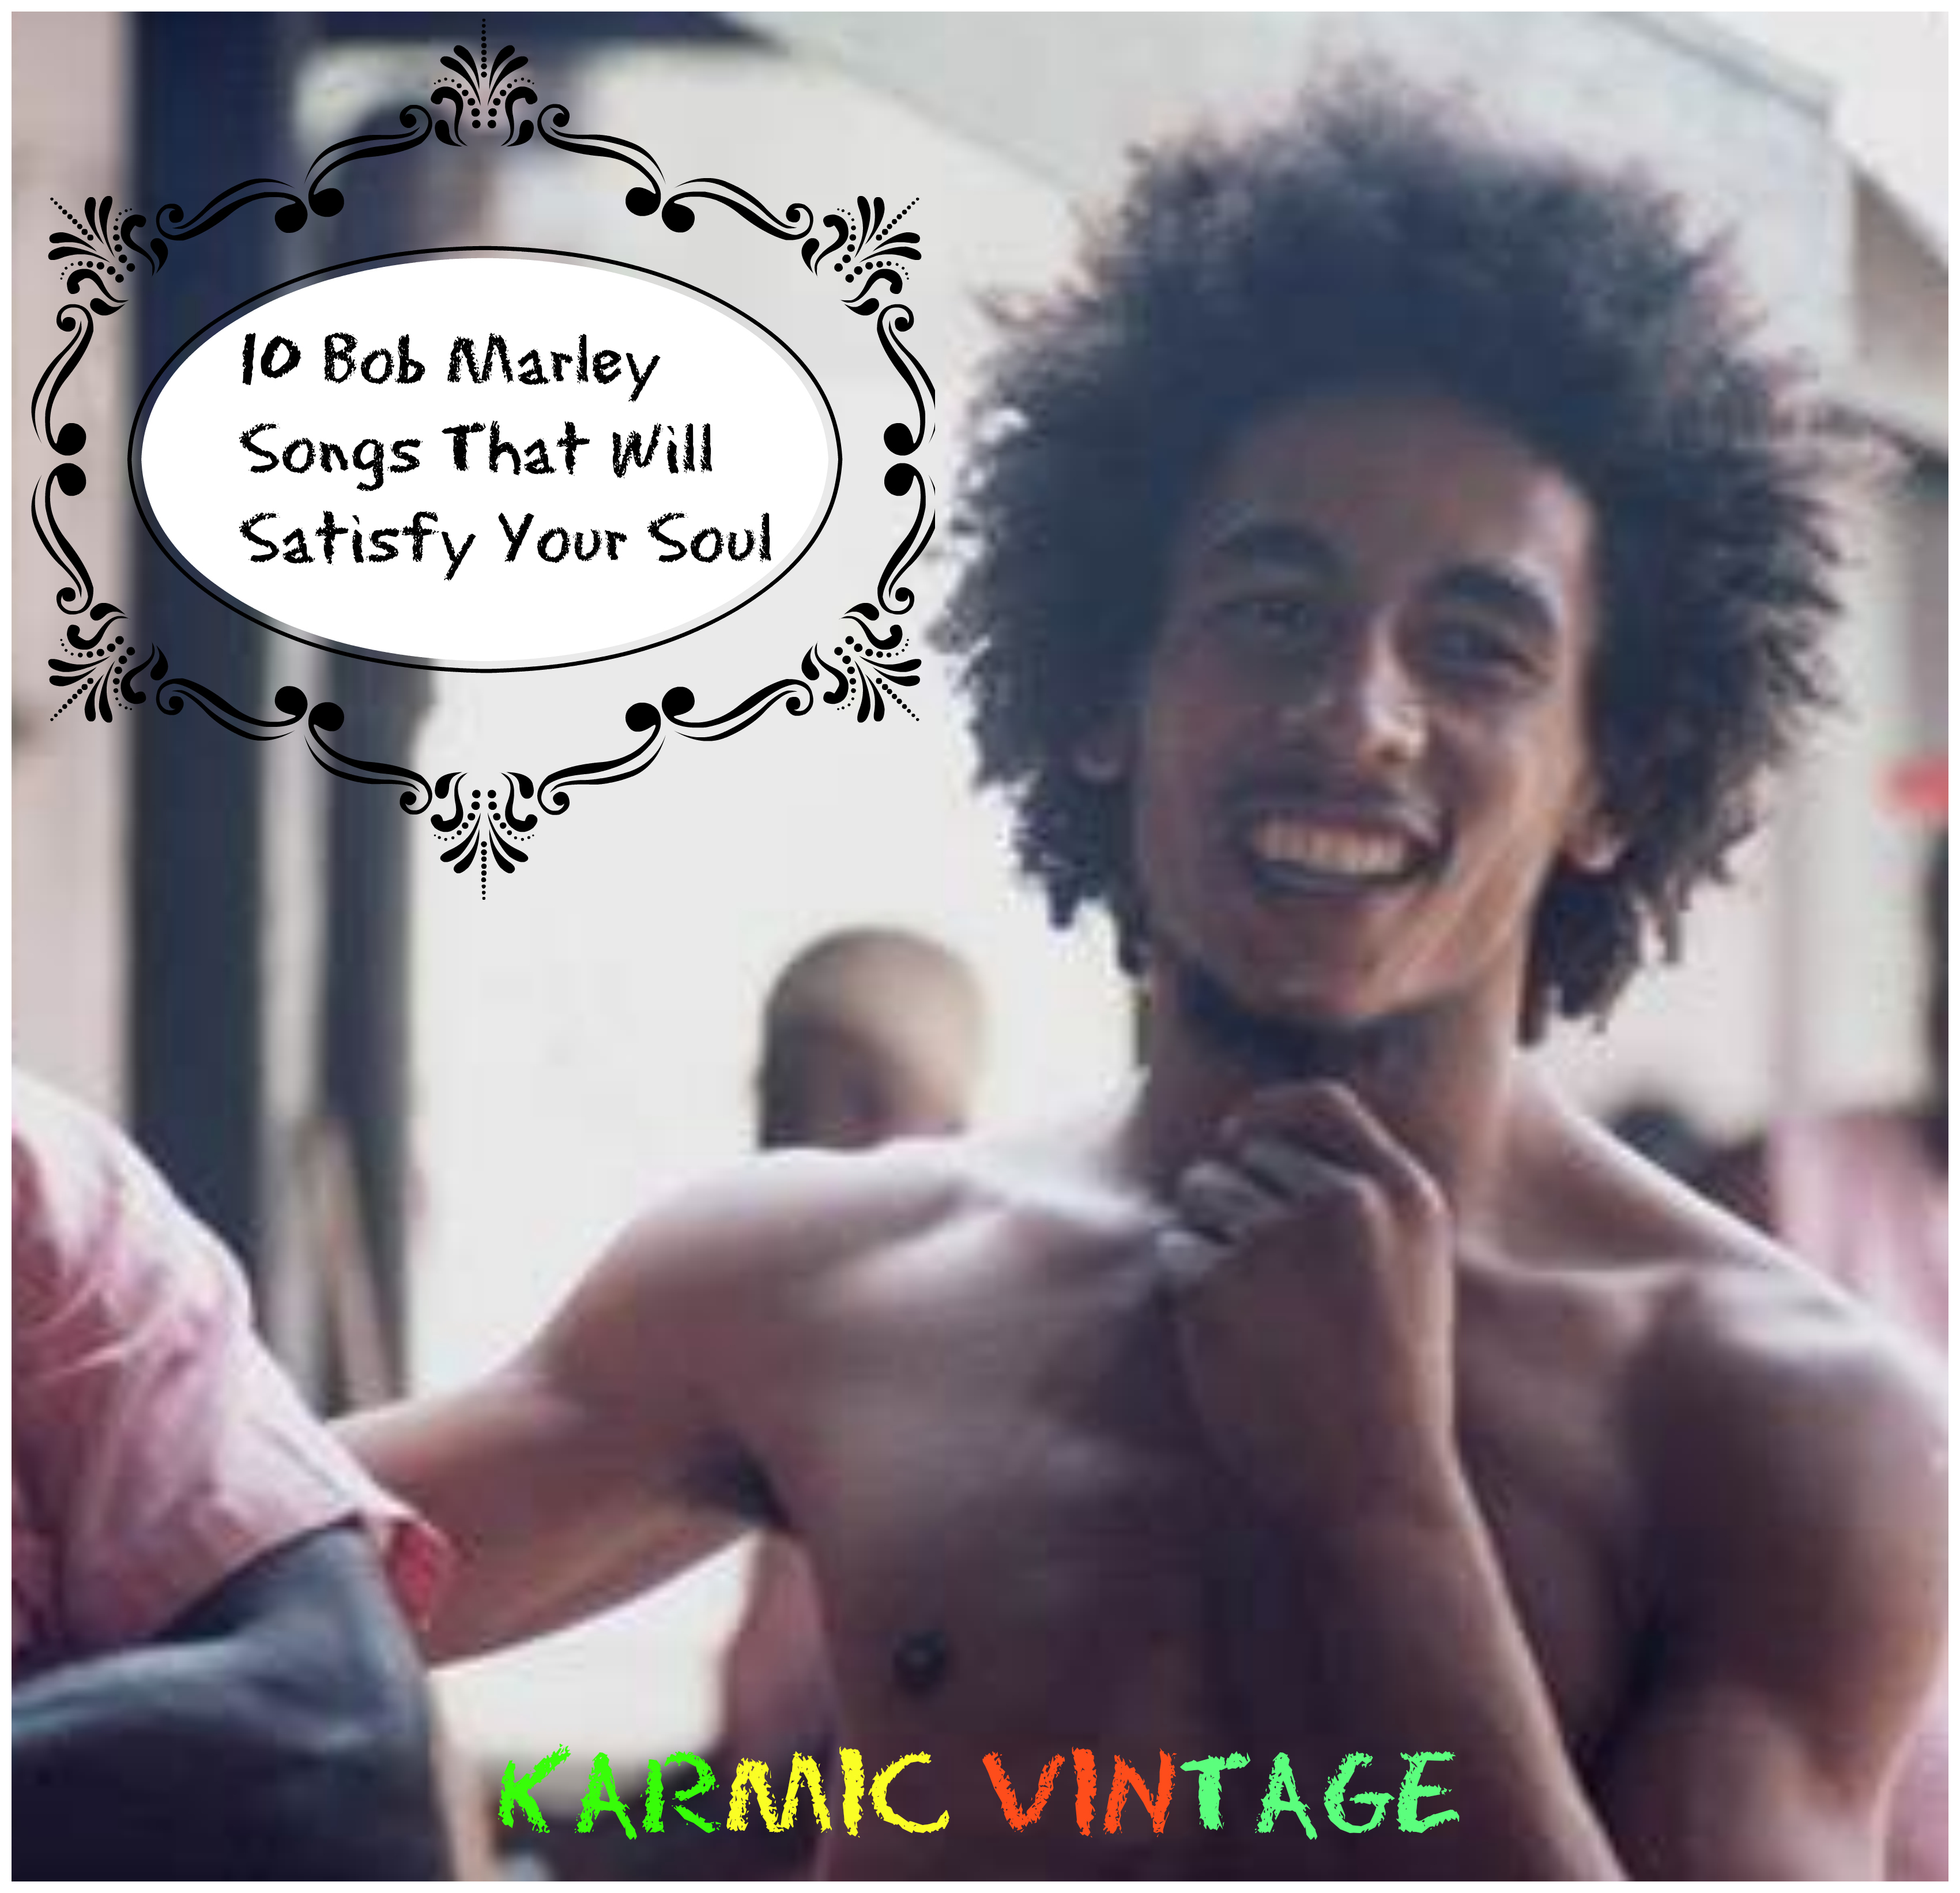 10 Bob Marley and The Wailers Songs That Will Satisfy Your Soul « Karmic Vintage